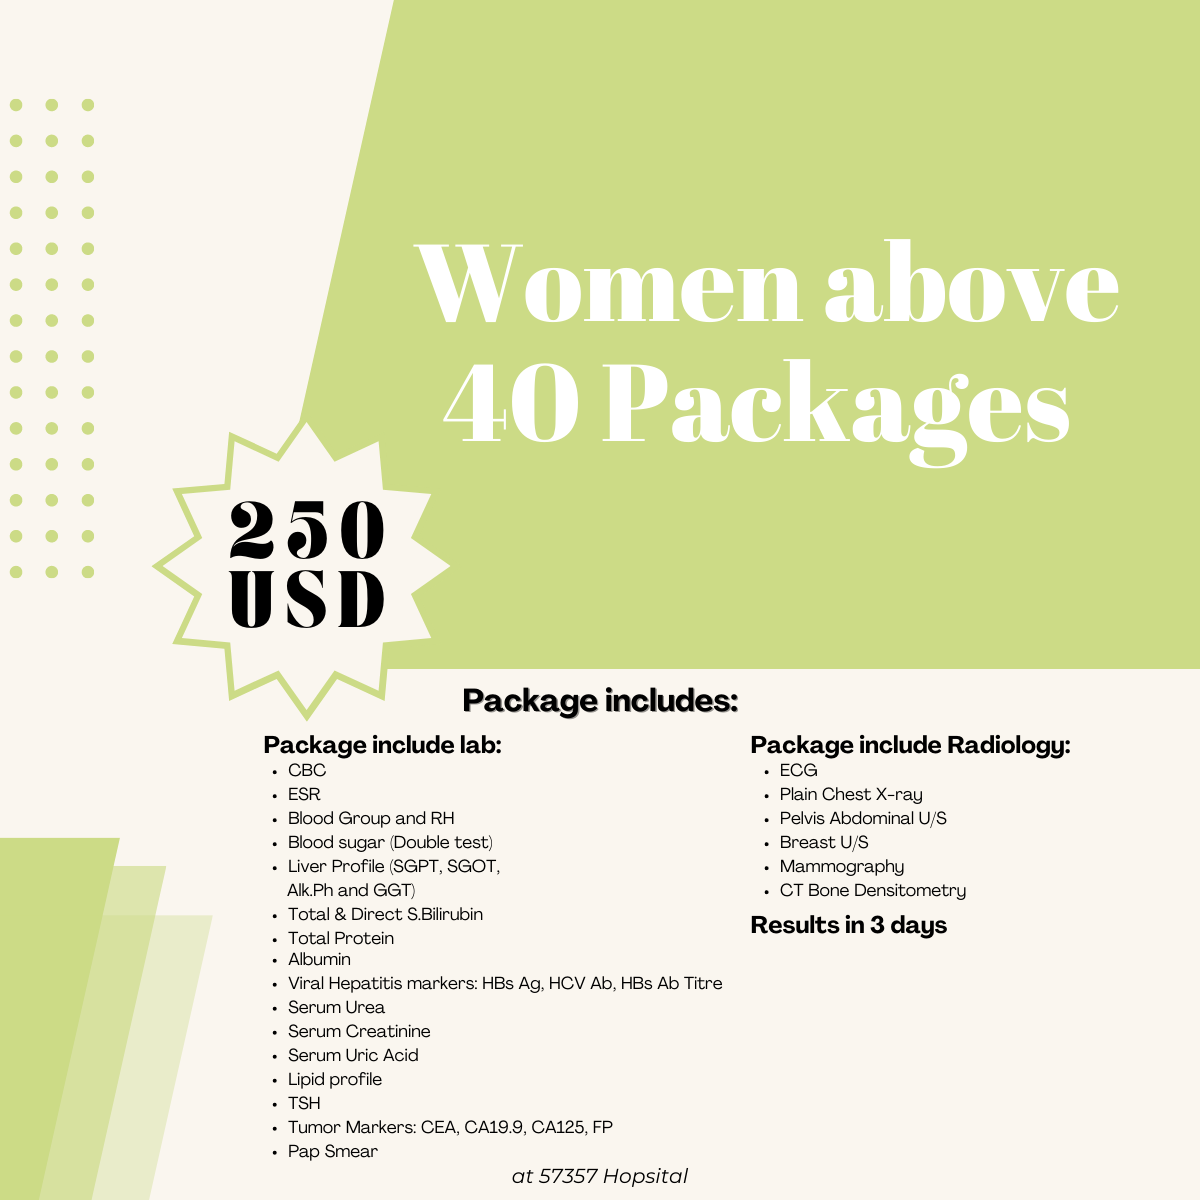 Women above 40 packages 